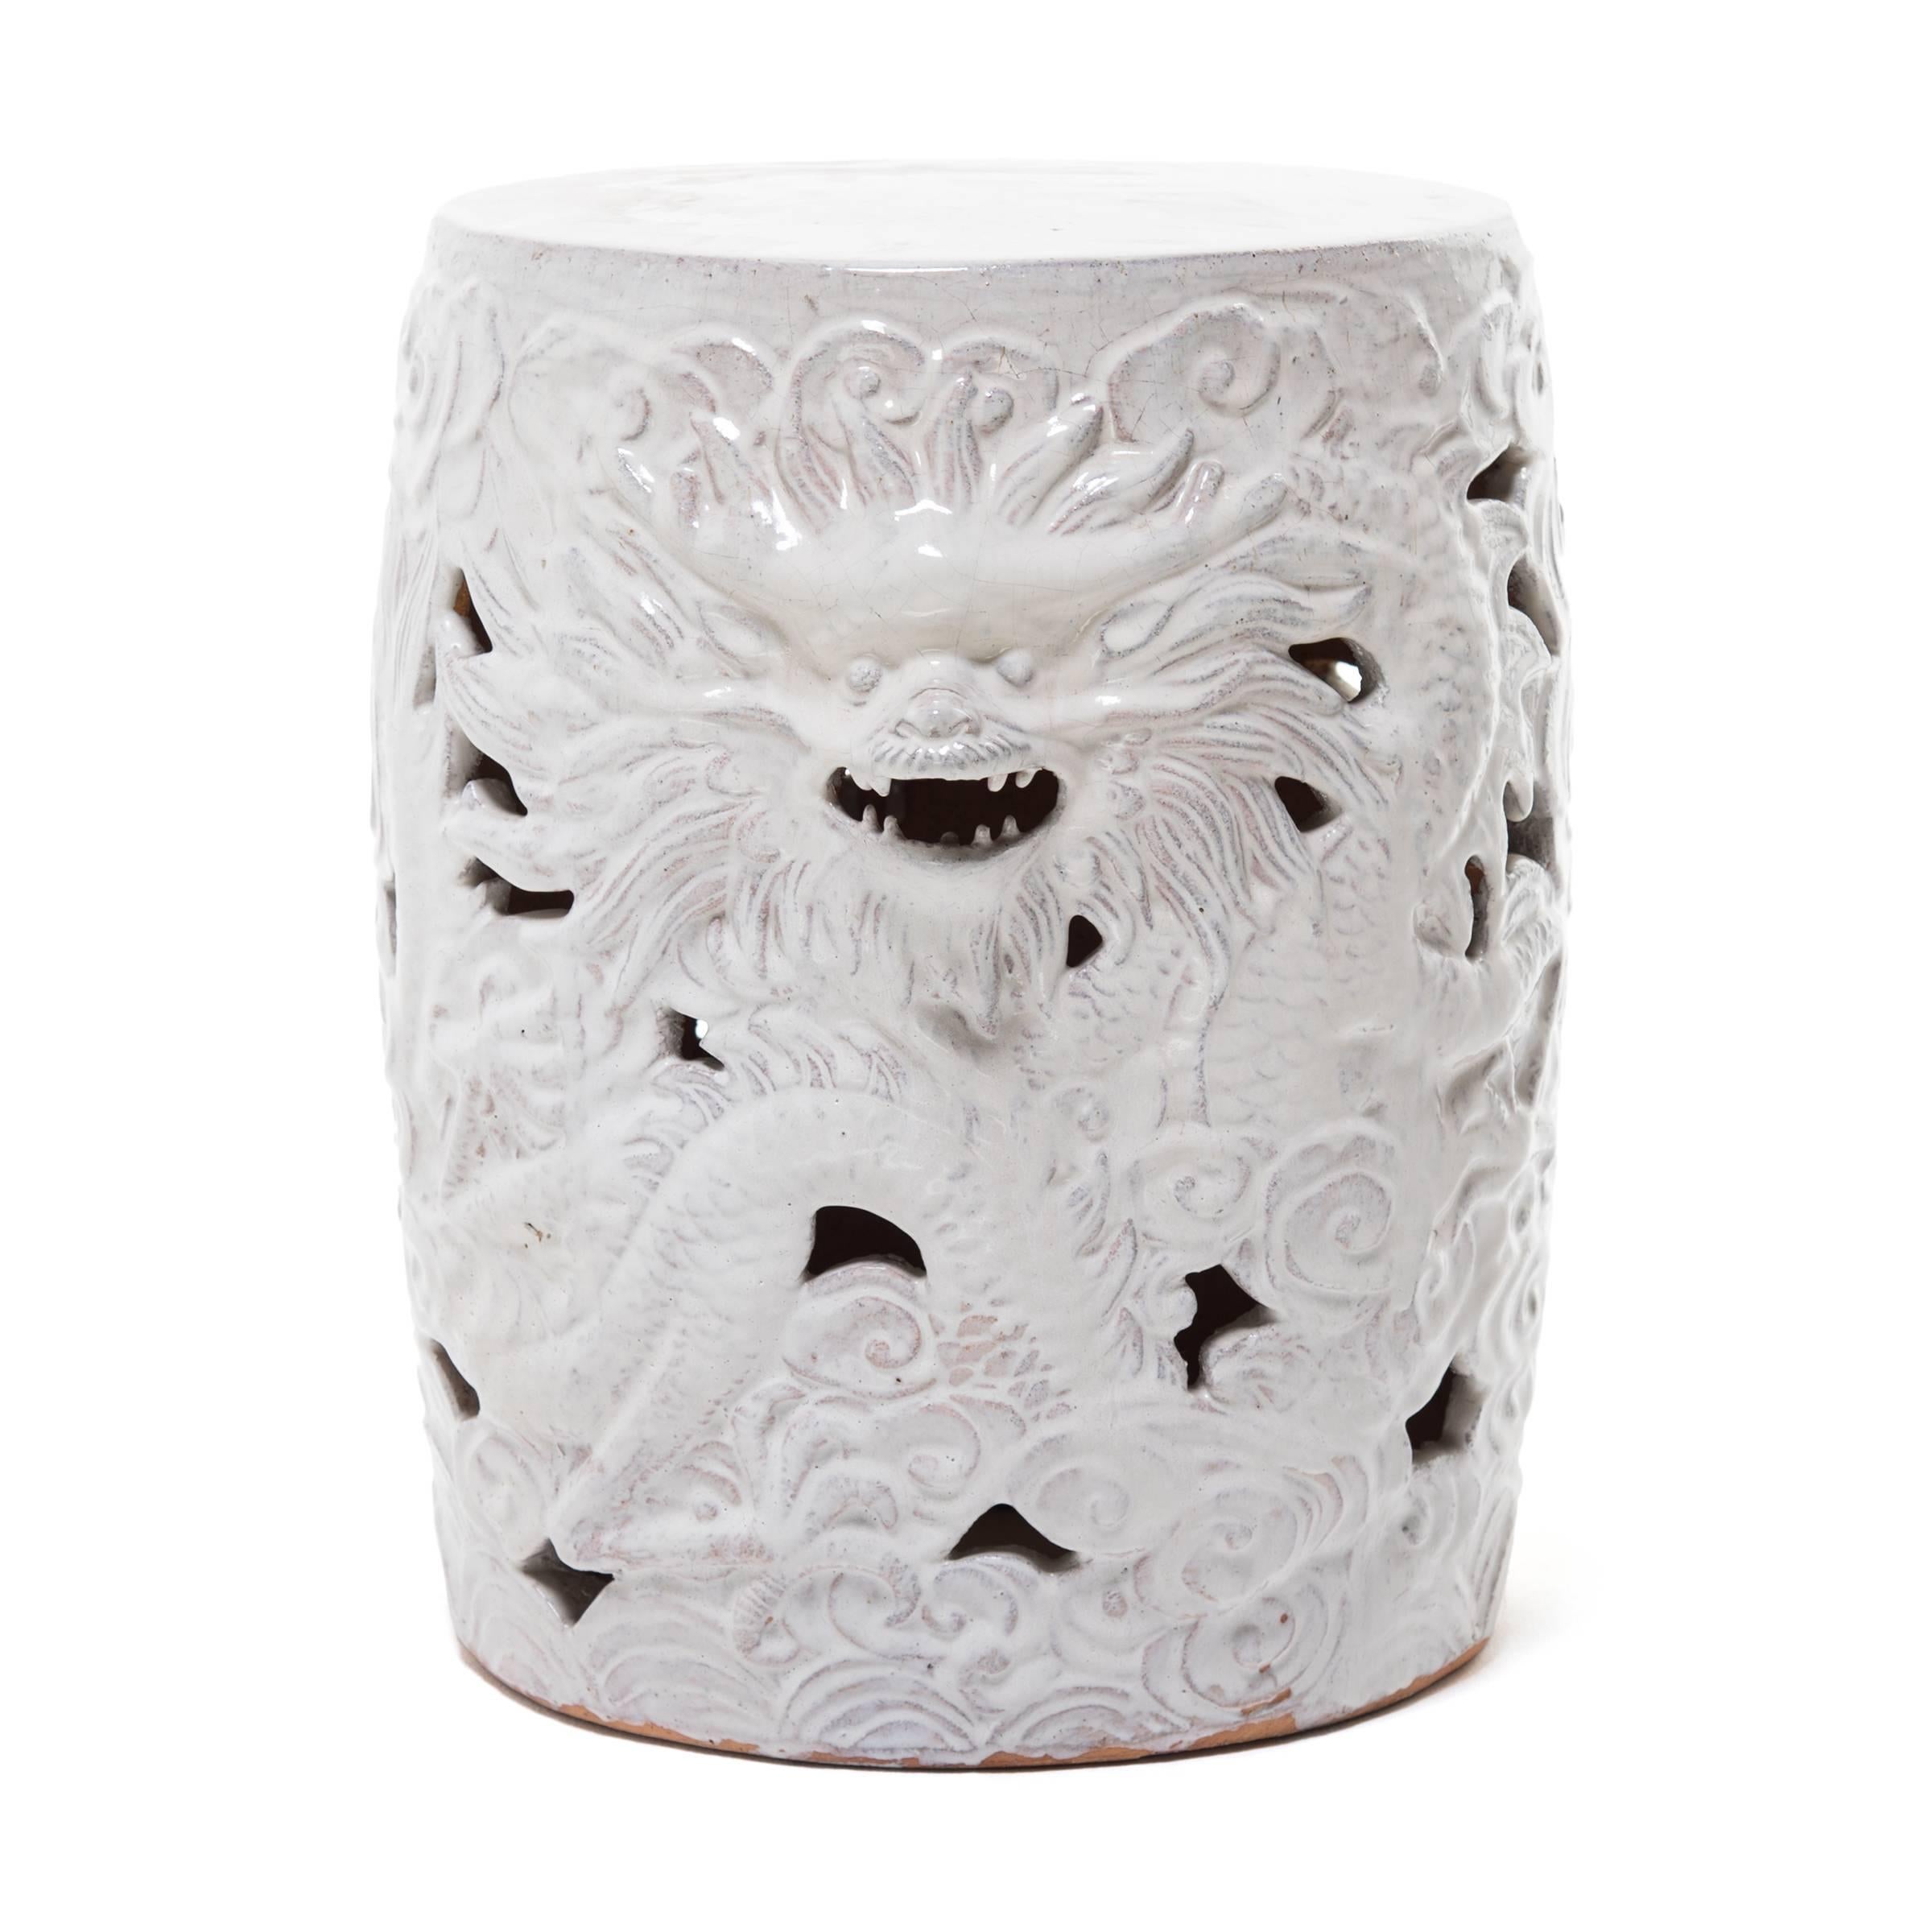 Garden stools were once fixtures in Chinese gardens; they were the perfect place to rest while taking in natural beauty. This one from Jiangxi Province is a stand out contemporary example of an ancient design. The rich sugar white hand applied glaze